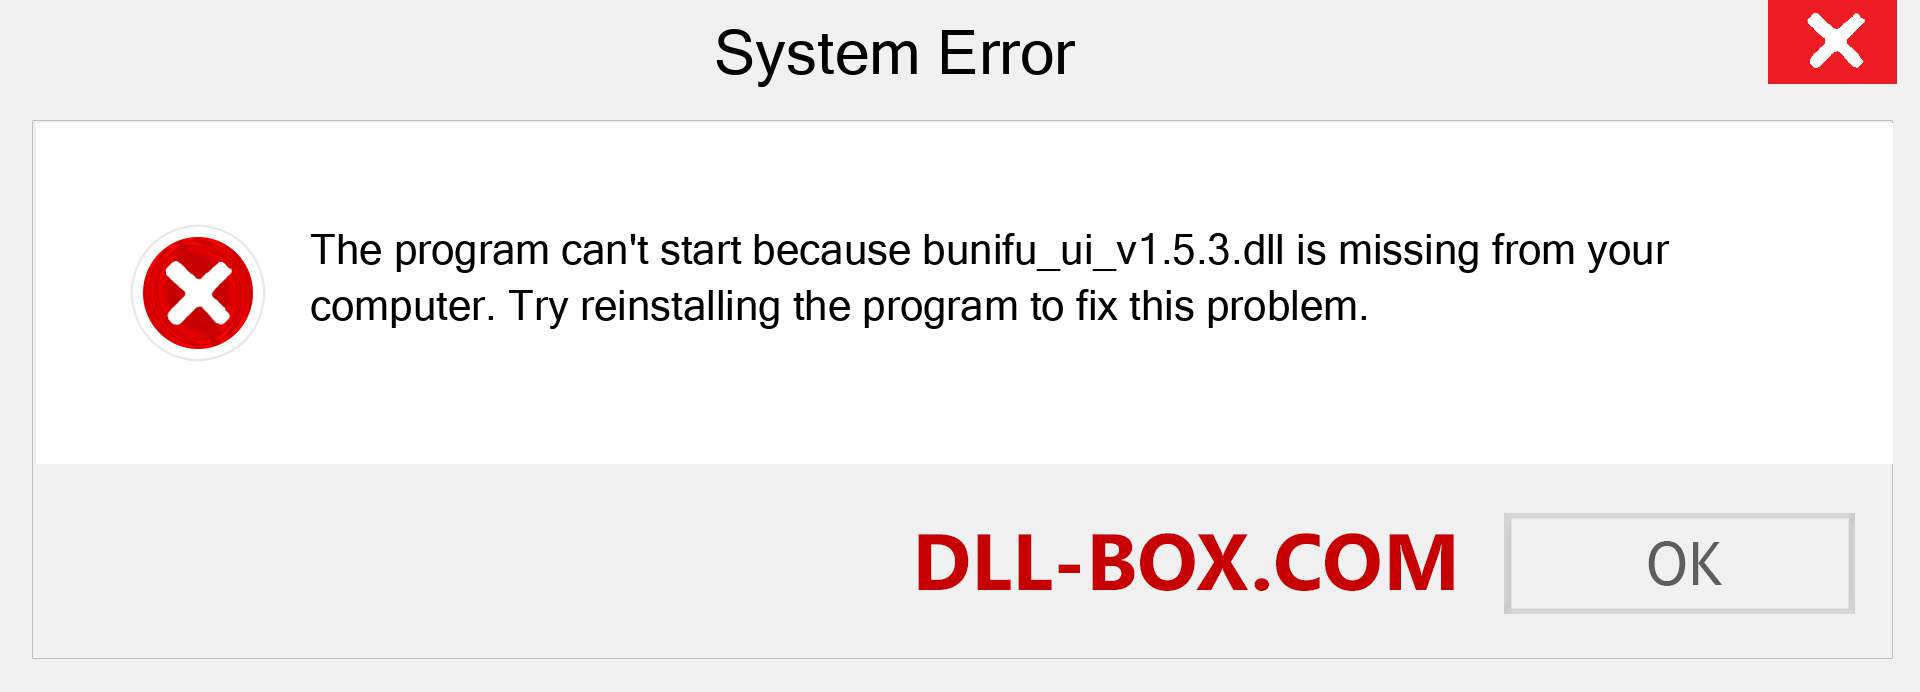  bunifu_ui_v1.5.3.dll file is missing?. Download for Windows 7, 8, 10 - Fix  bunifu_ui_v1.5.3 dll Missing Error on Windows, photos, images